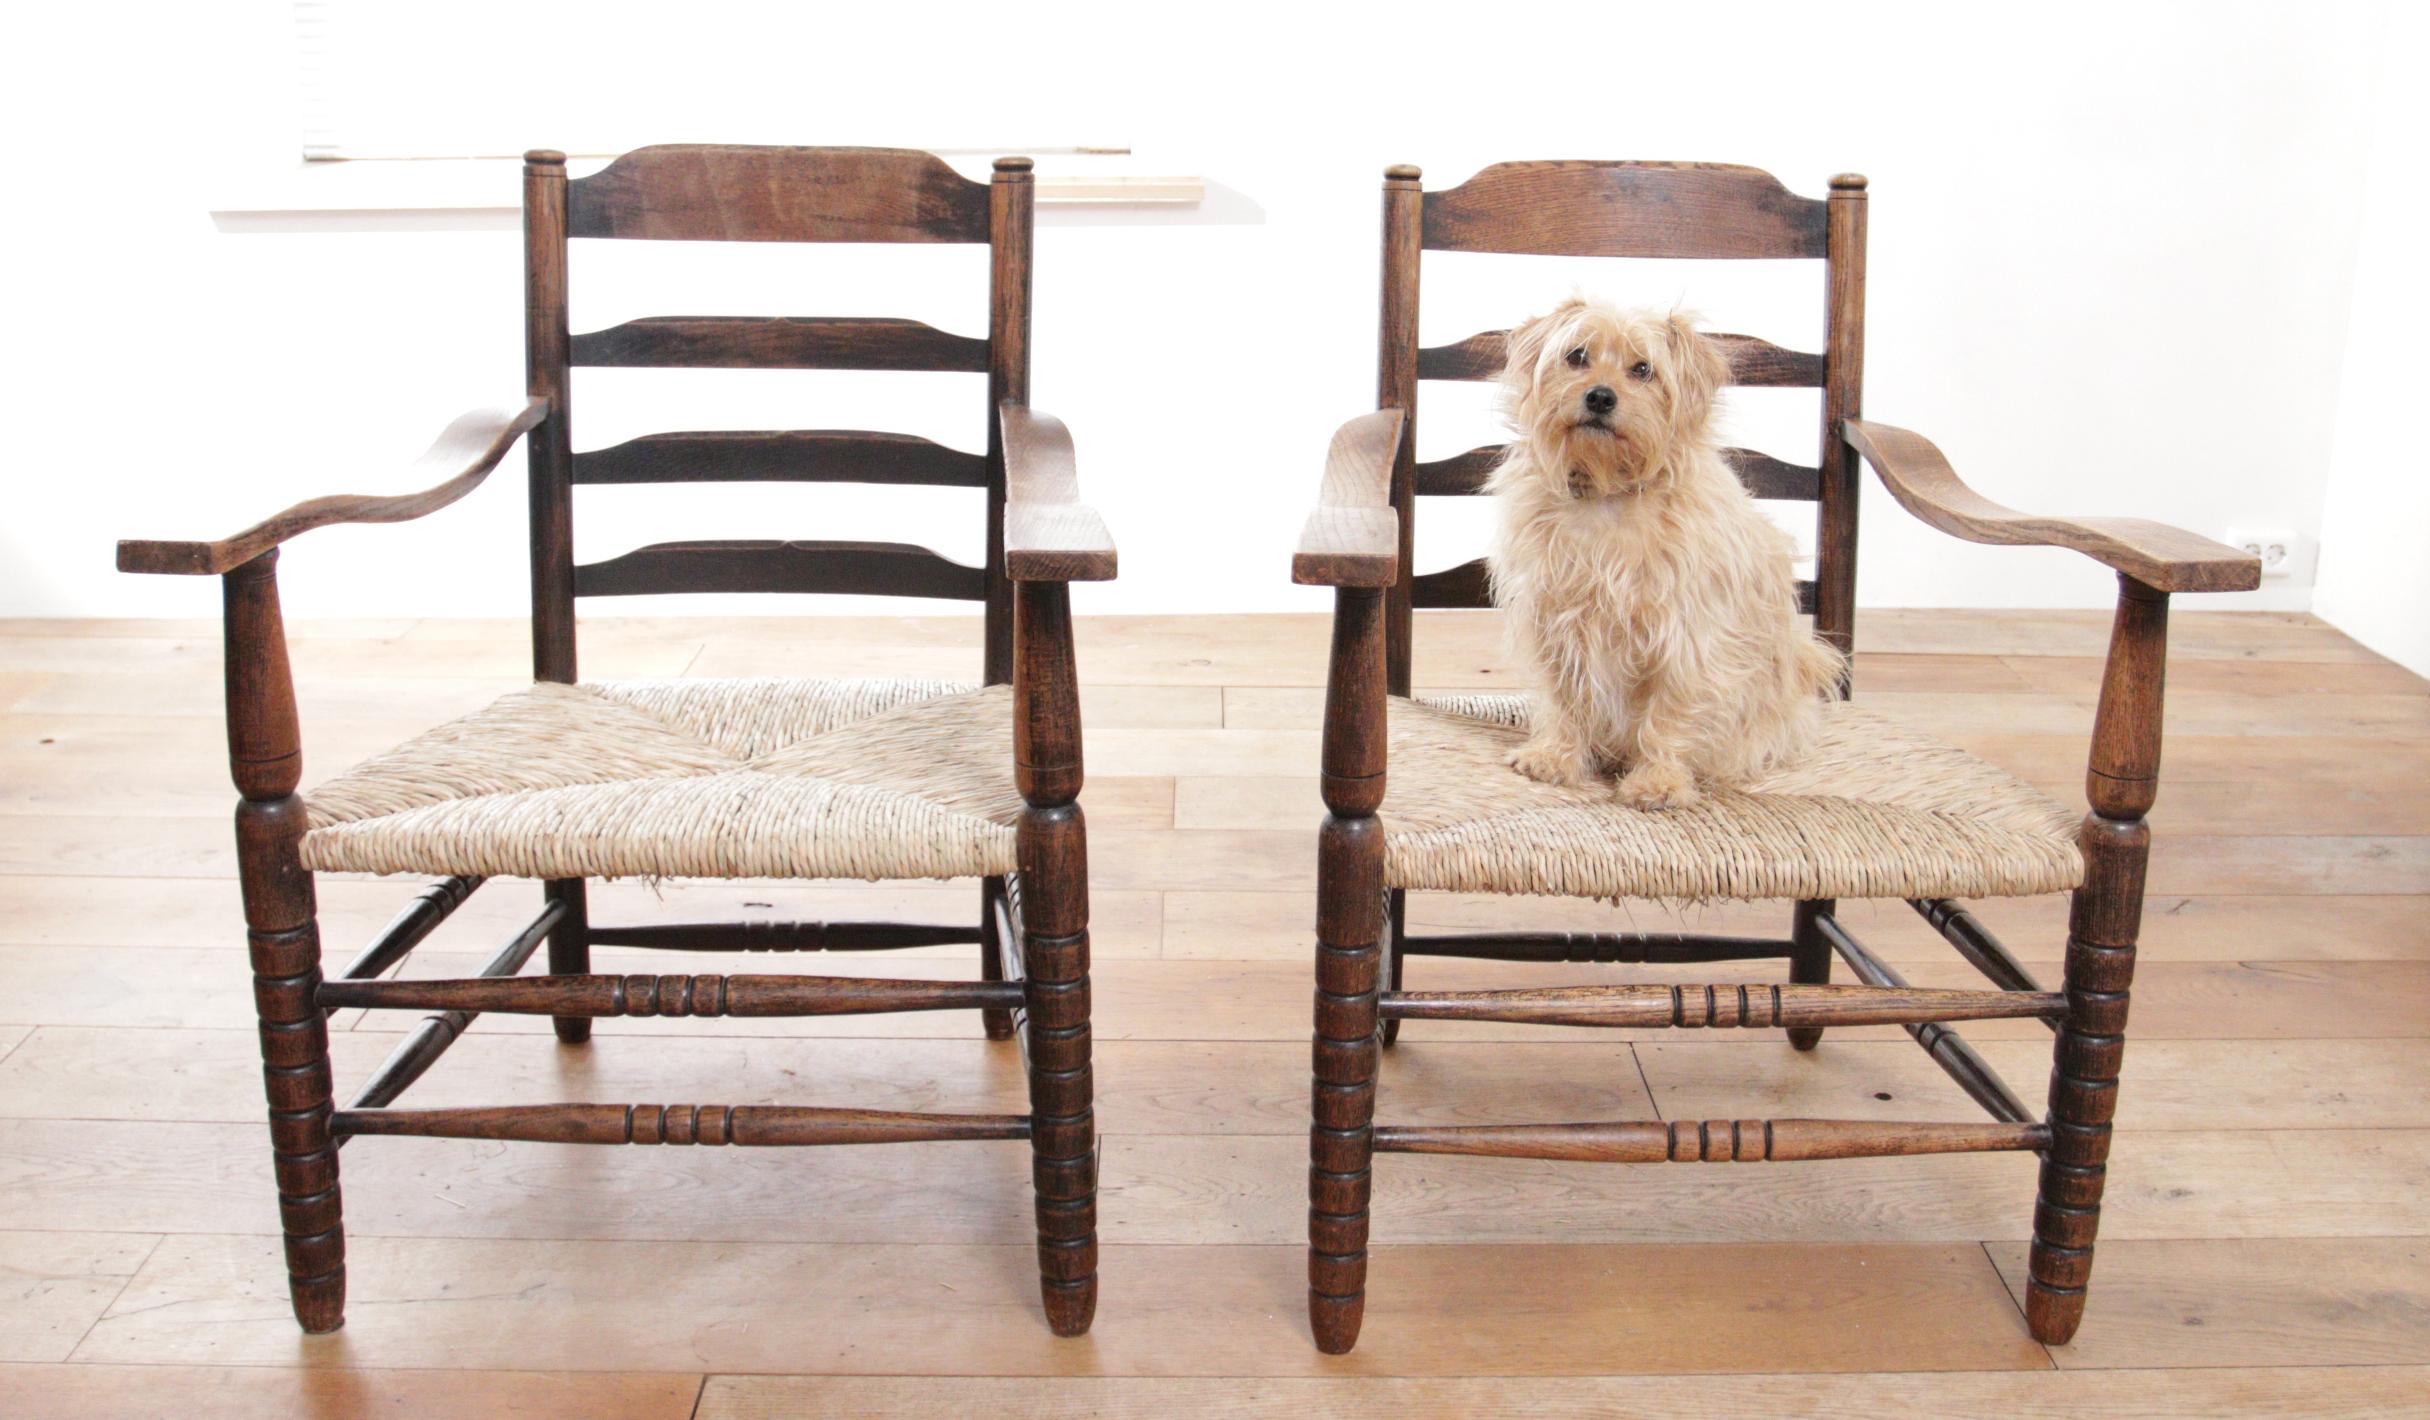 These charming oak ladder back chairs featuring wicker seats make an excellent choice for enhancing the ambiance of any living space. Combining style, comfort, and durability, they are versatile additions that will elevate the decor in your dining